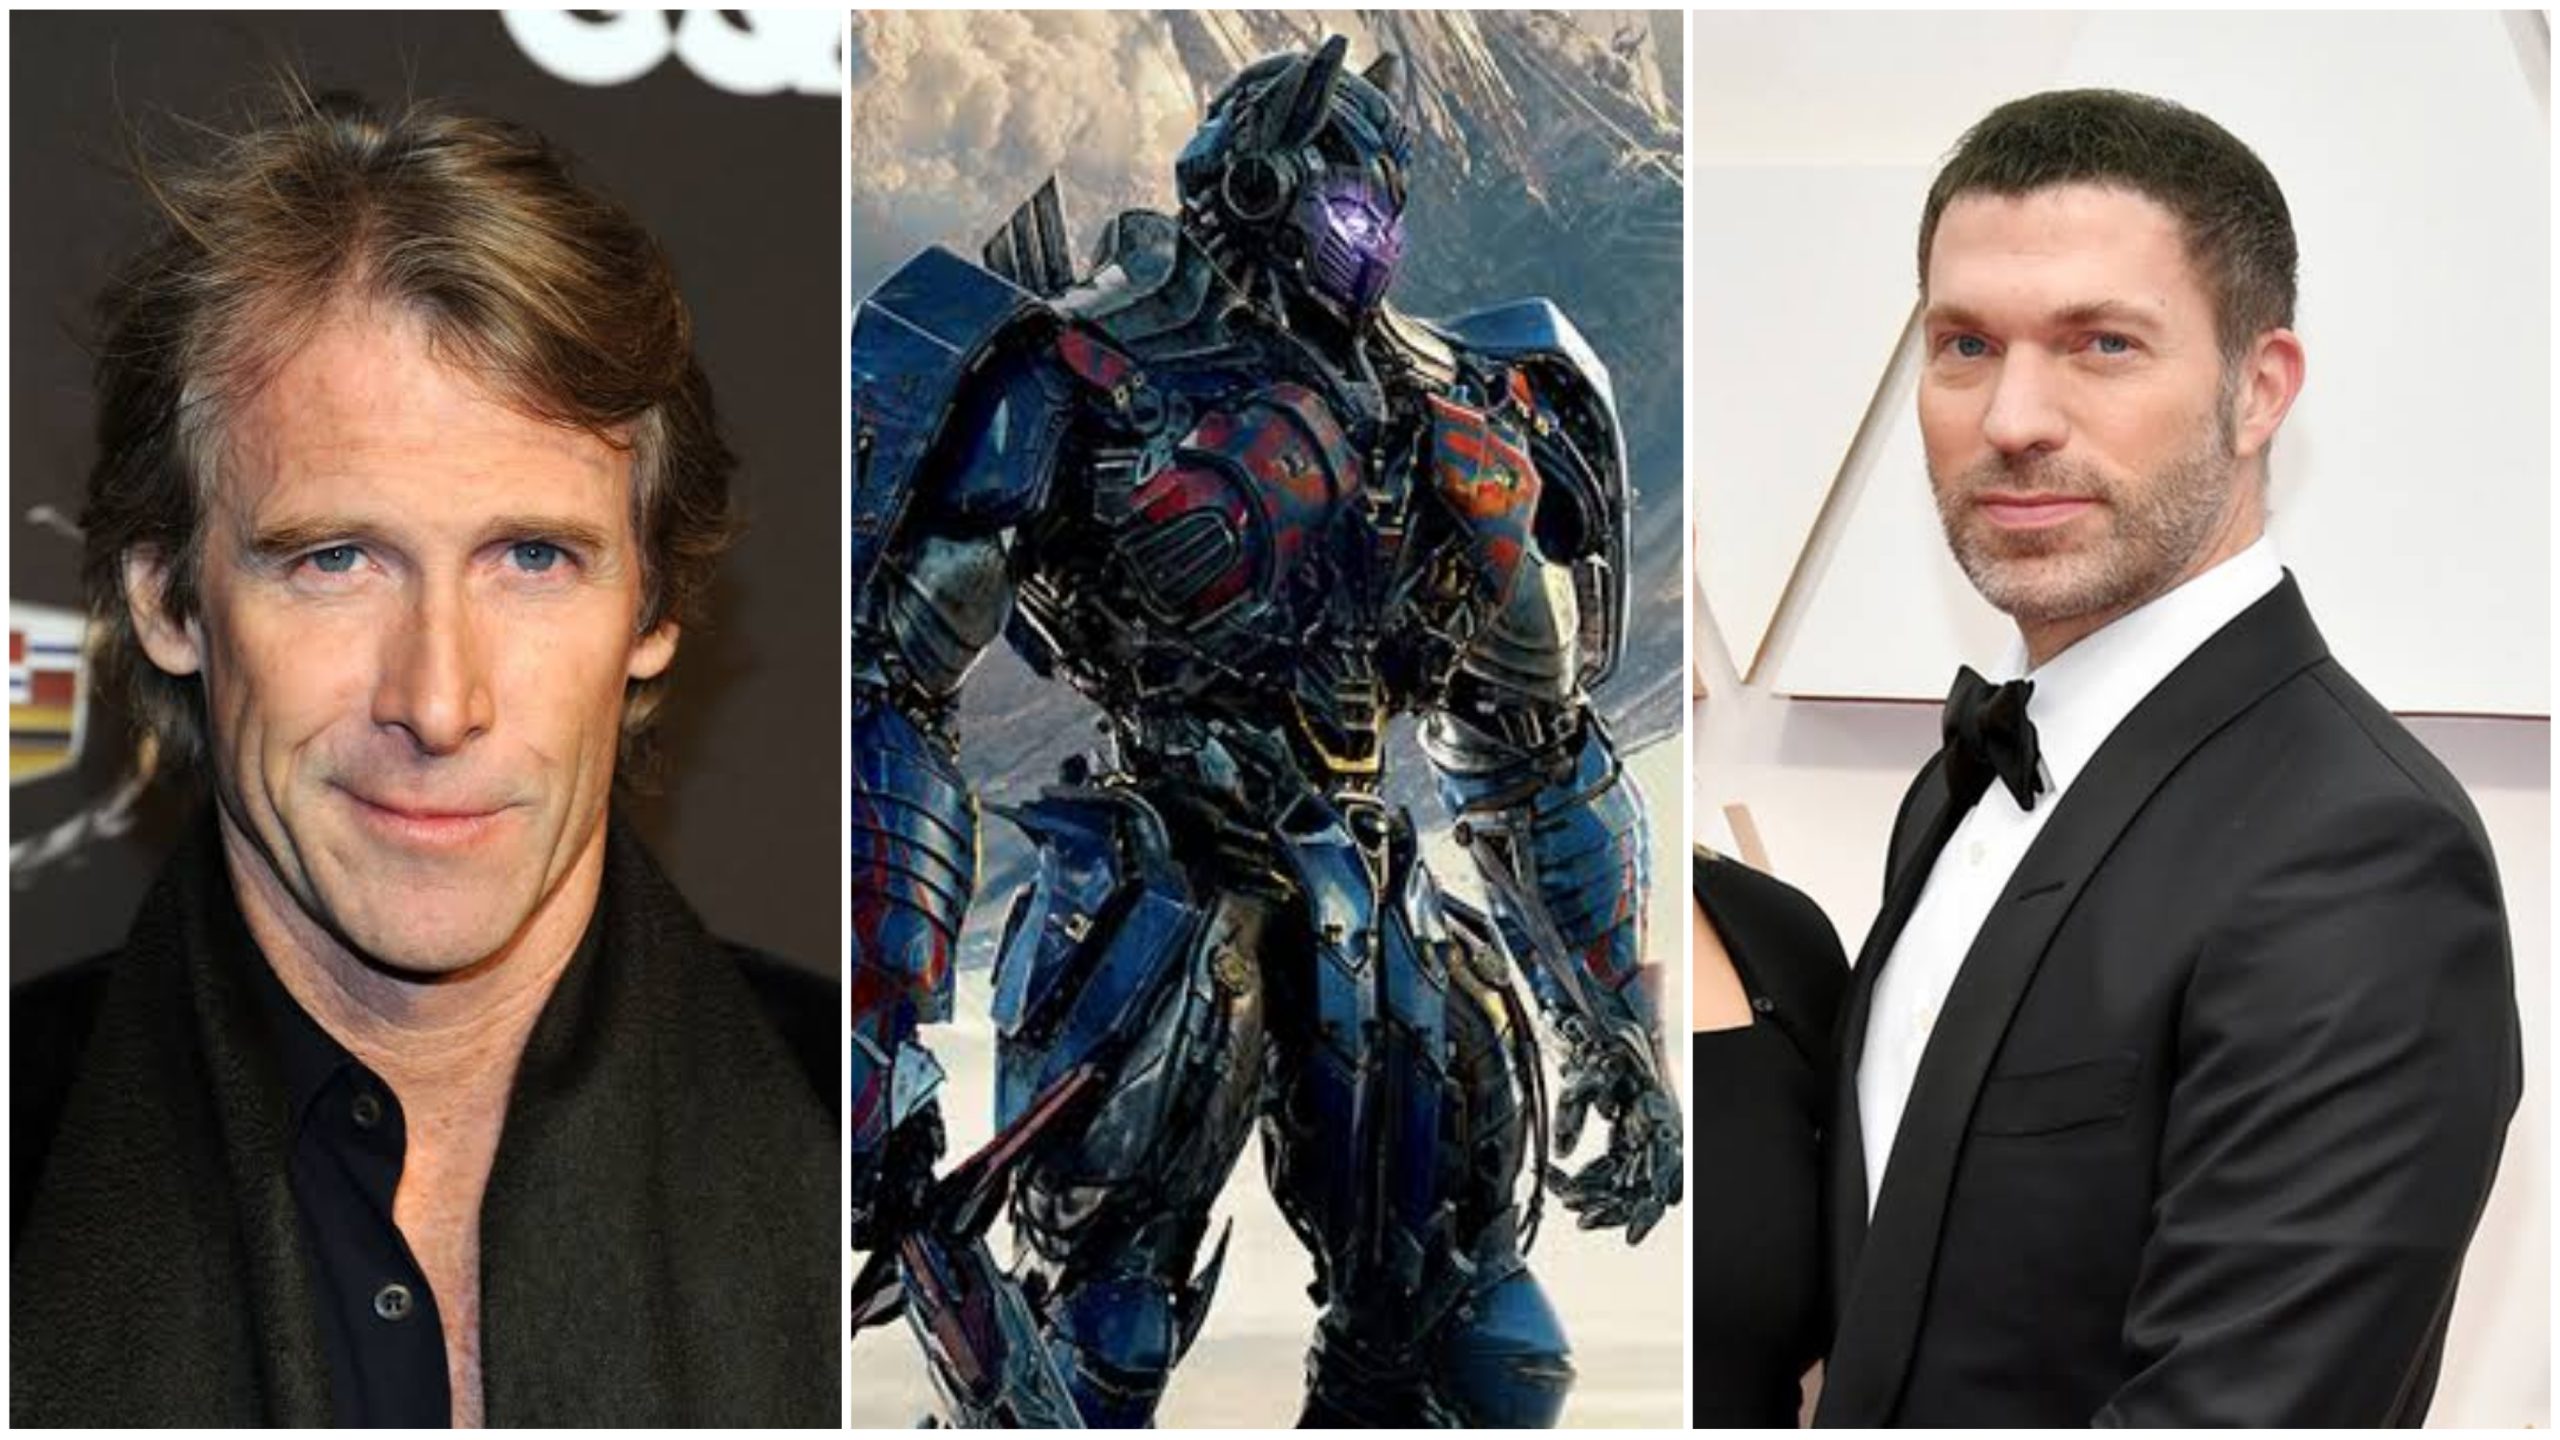 Travis Knight and Micheal Bay